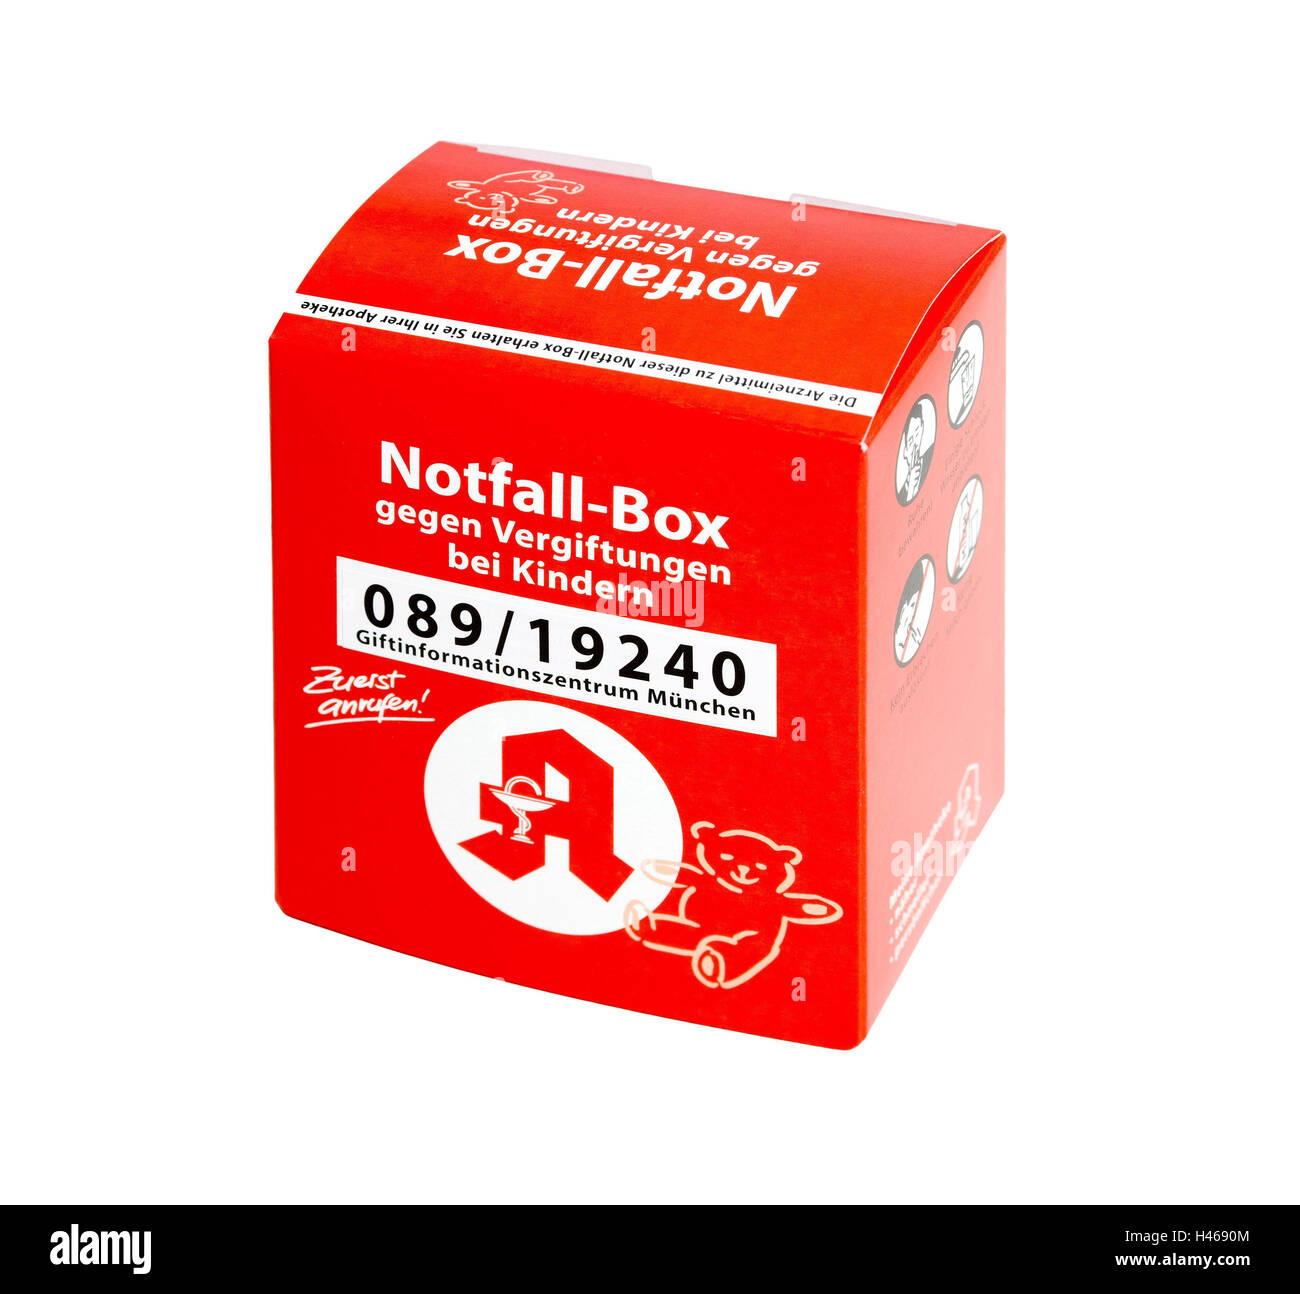 Emergency Box, poisoning, poison, toxic, emergency, emergency box, children's emergency box, box, box, pharmacy, medicine, emergency, poison, poison Info, poison center, red, phone number, emergency number, knock-out, Stock Photo